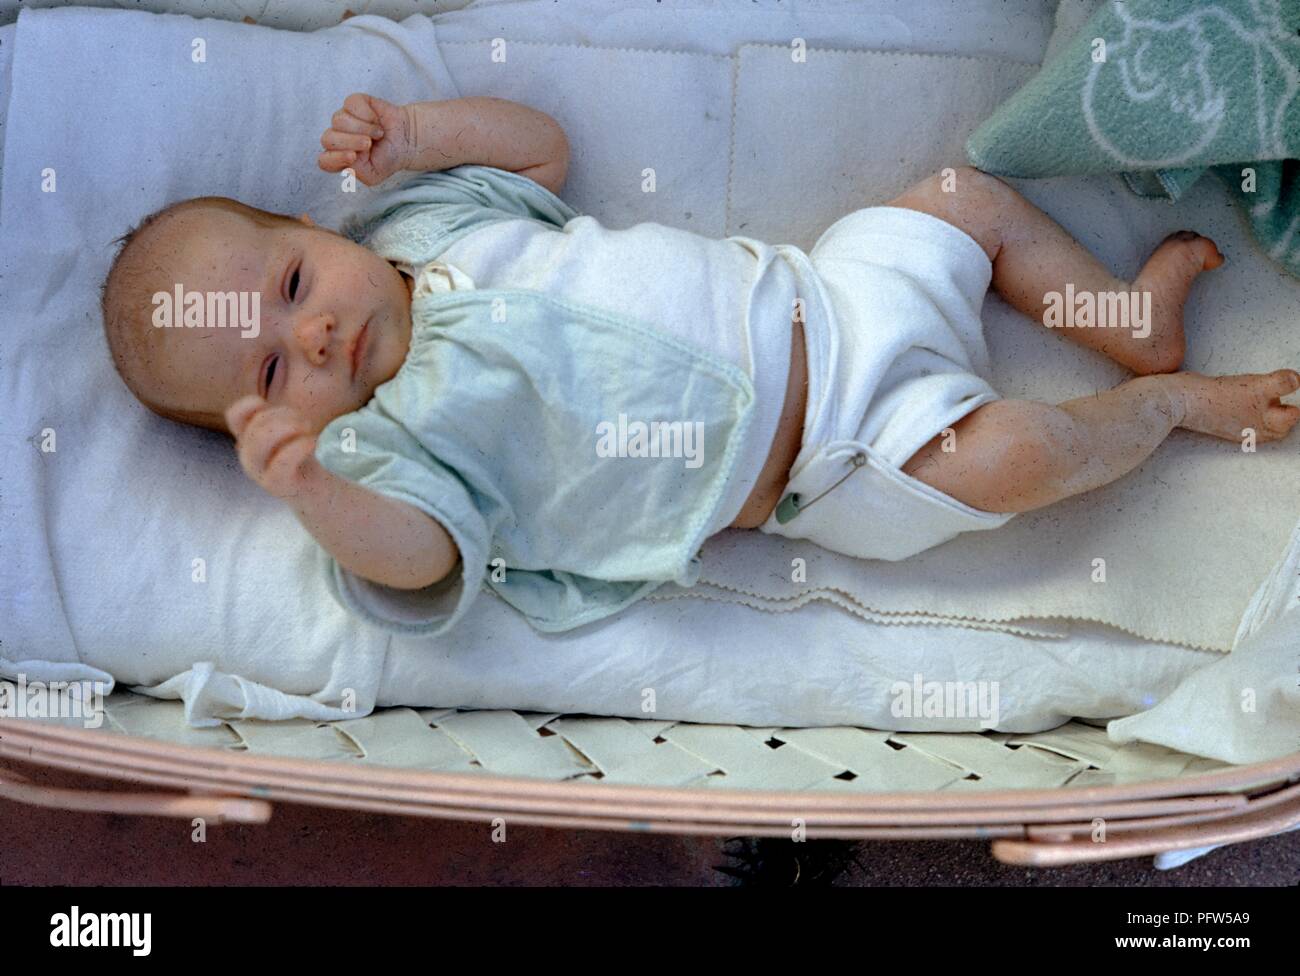 Diaper pins. Cloth diapers were my only option when I was raising my kids.  : r/nostalgia